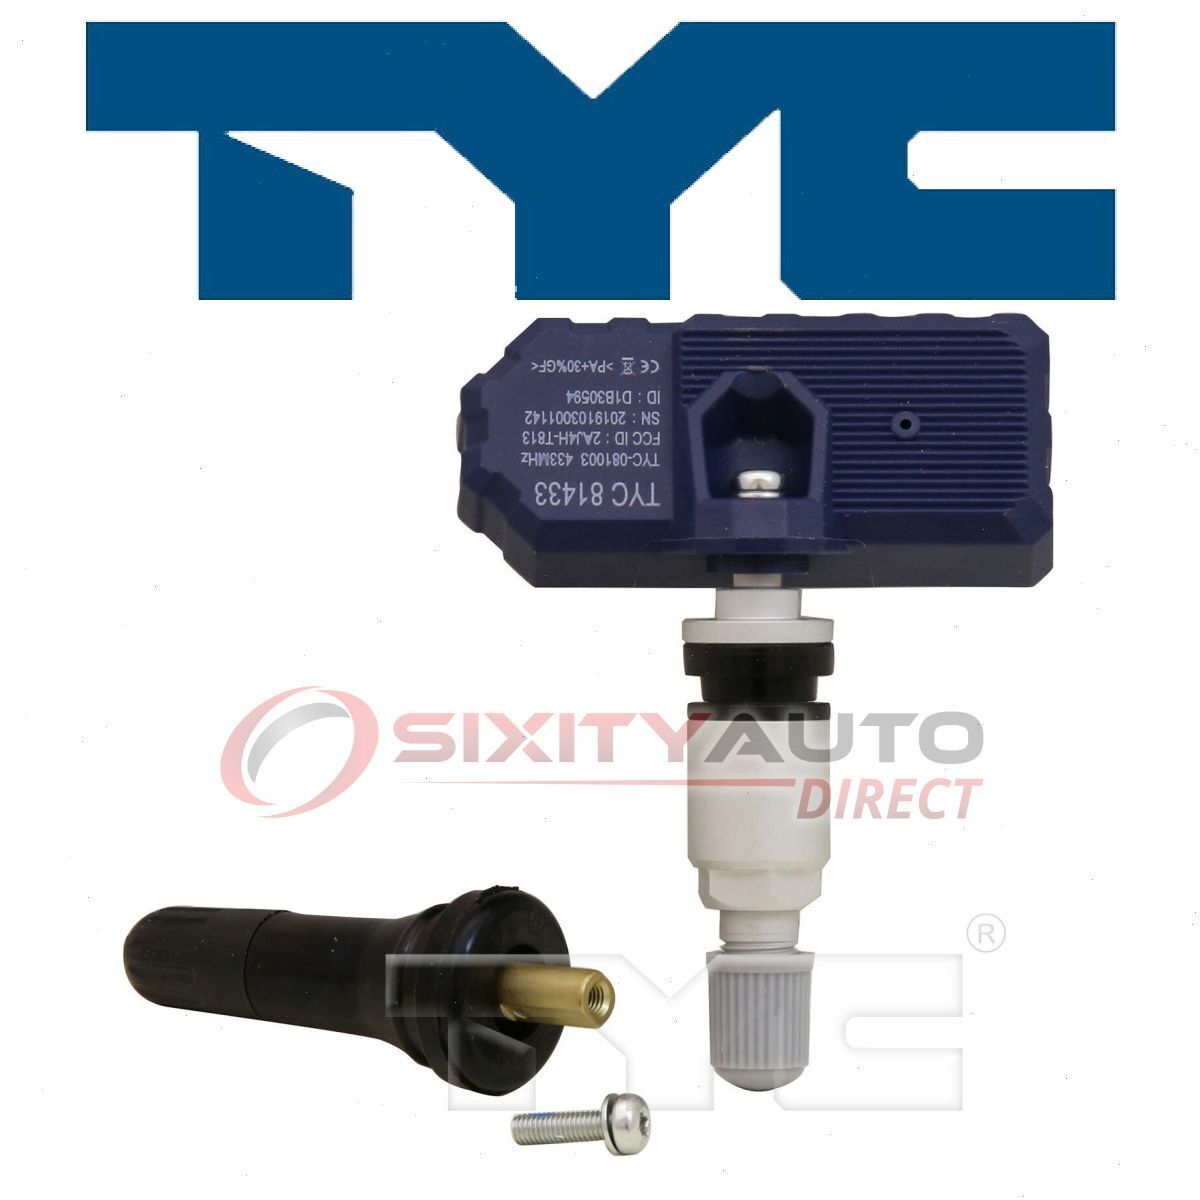 TYC TPMS Programmable Sensor for 2015 Mercedes-Benz C400 Tire Pressure rt